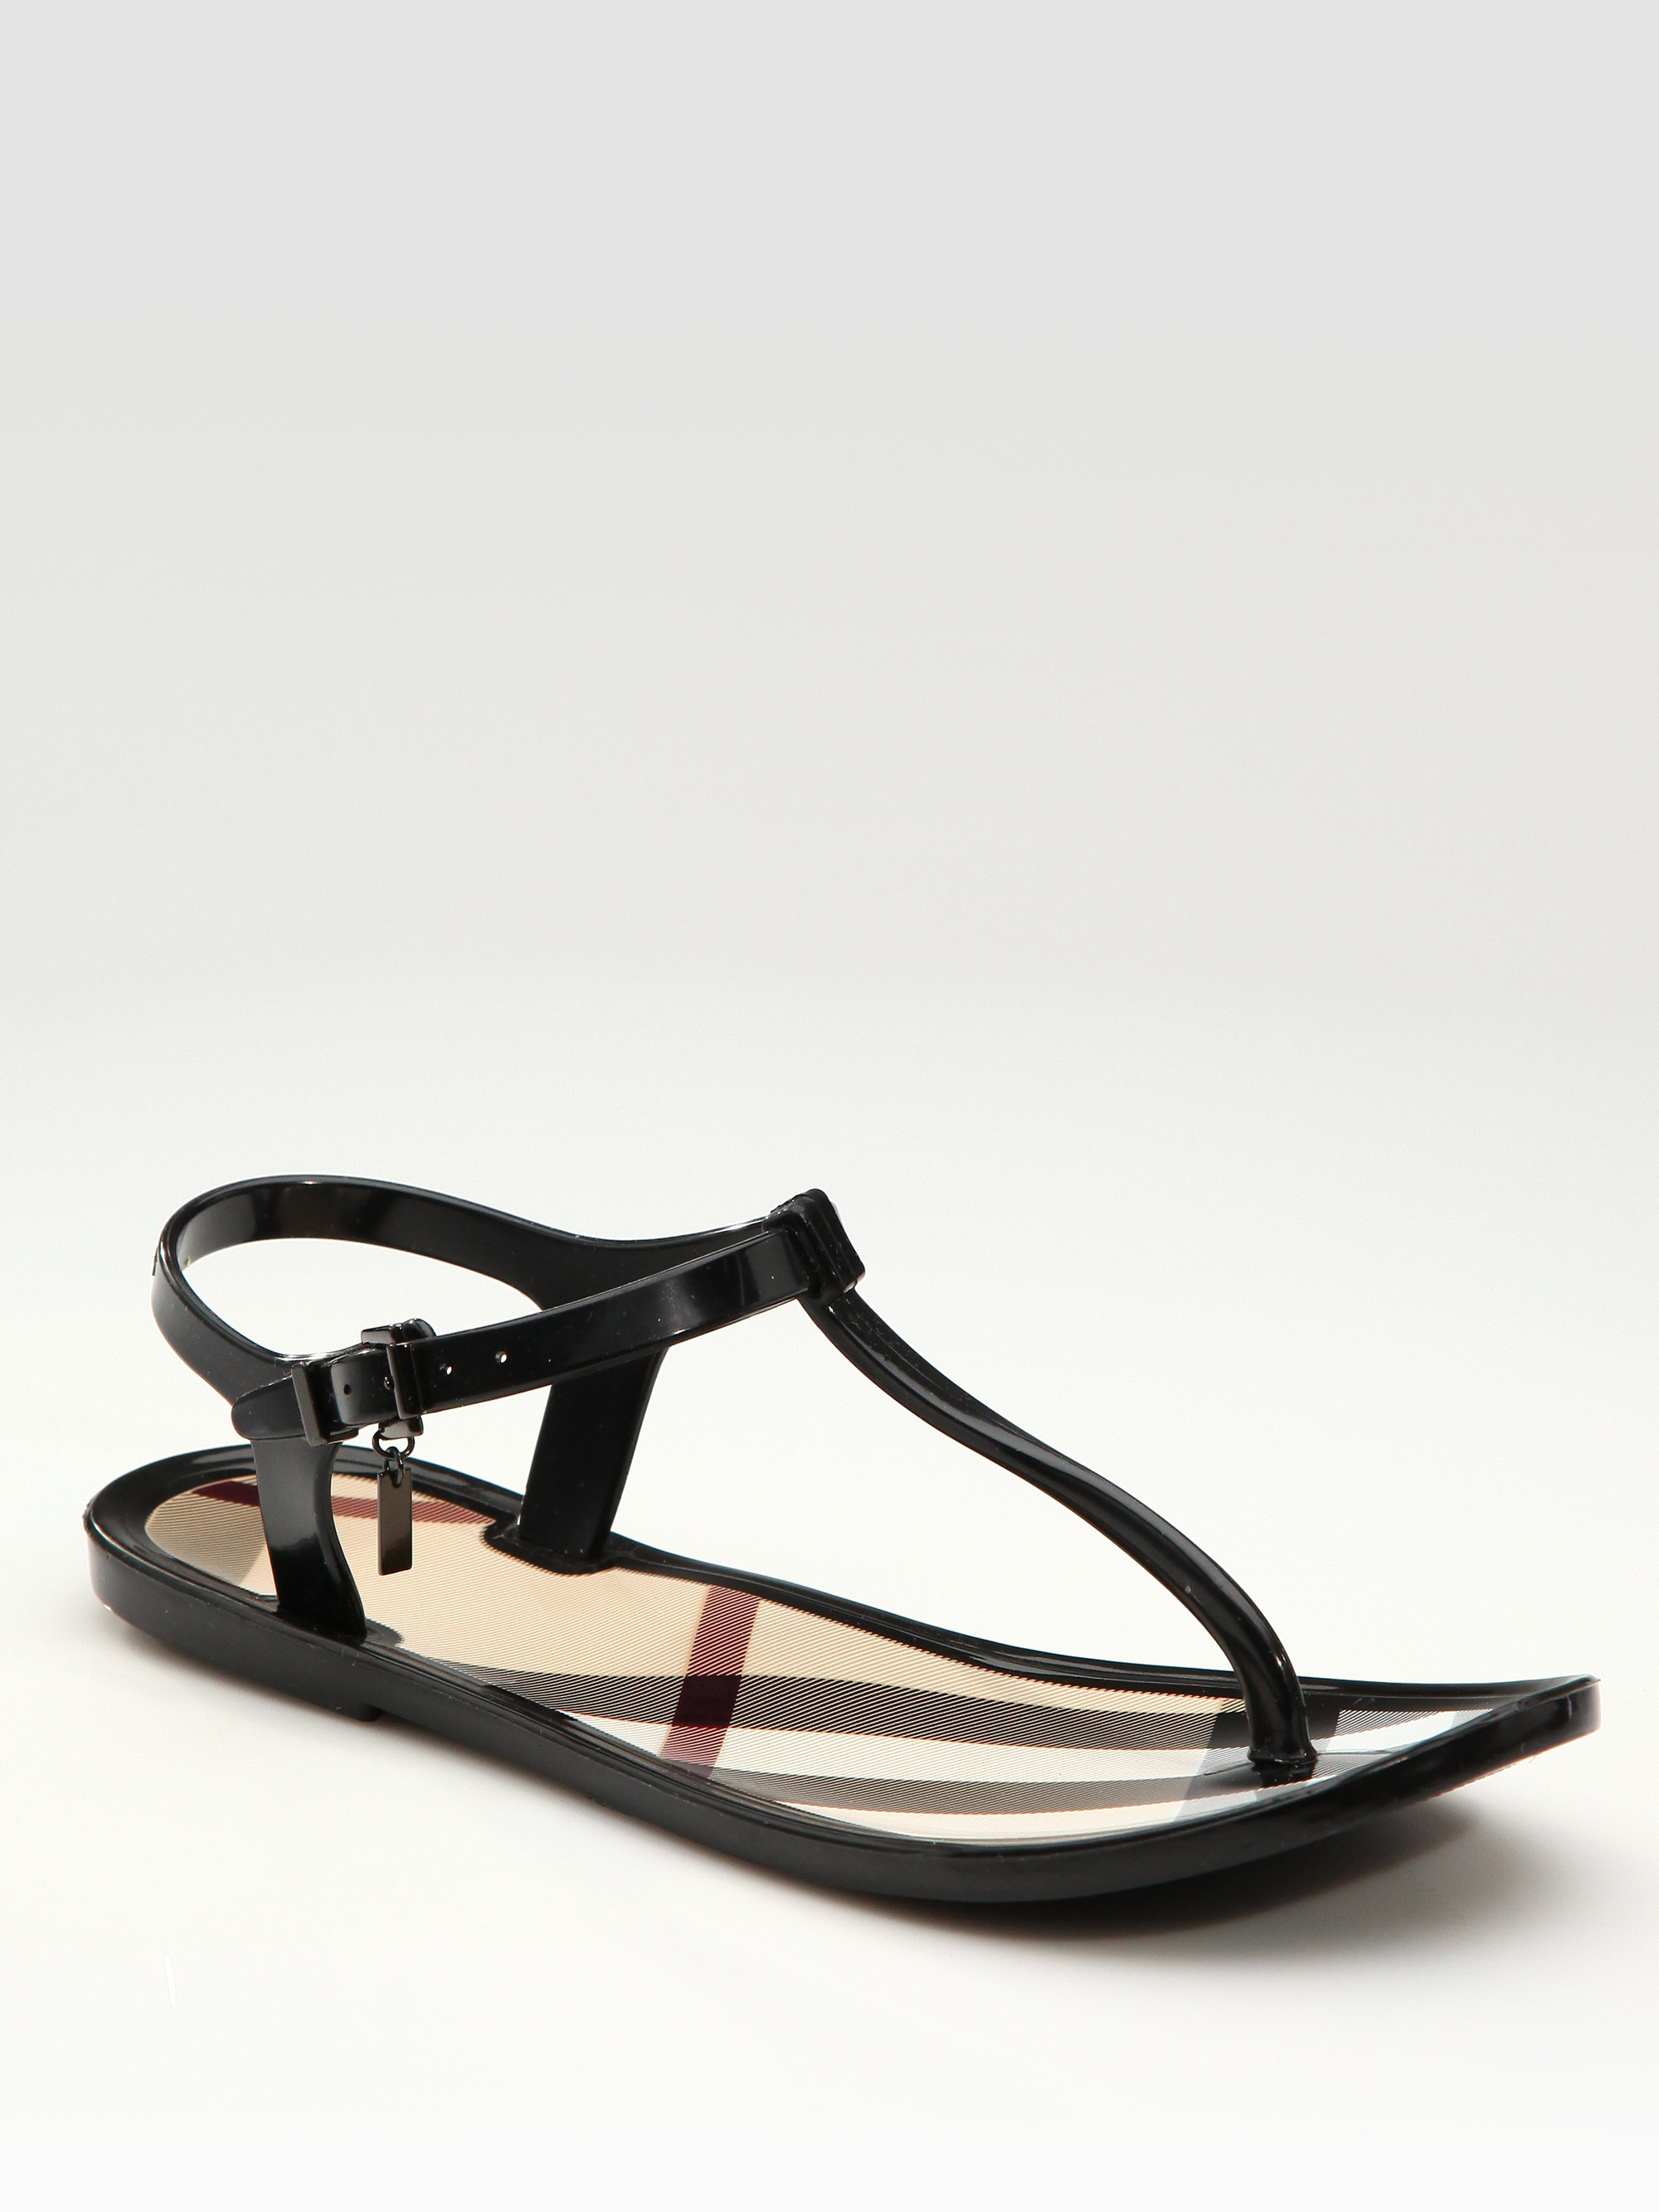 Burberry Rubber Thong Sandals in Black 